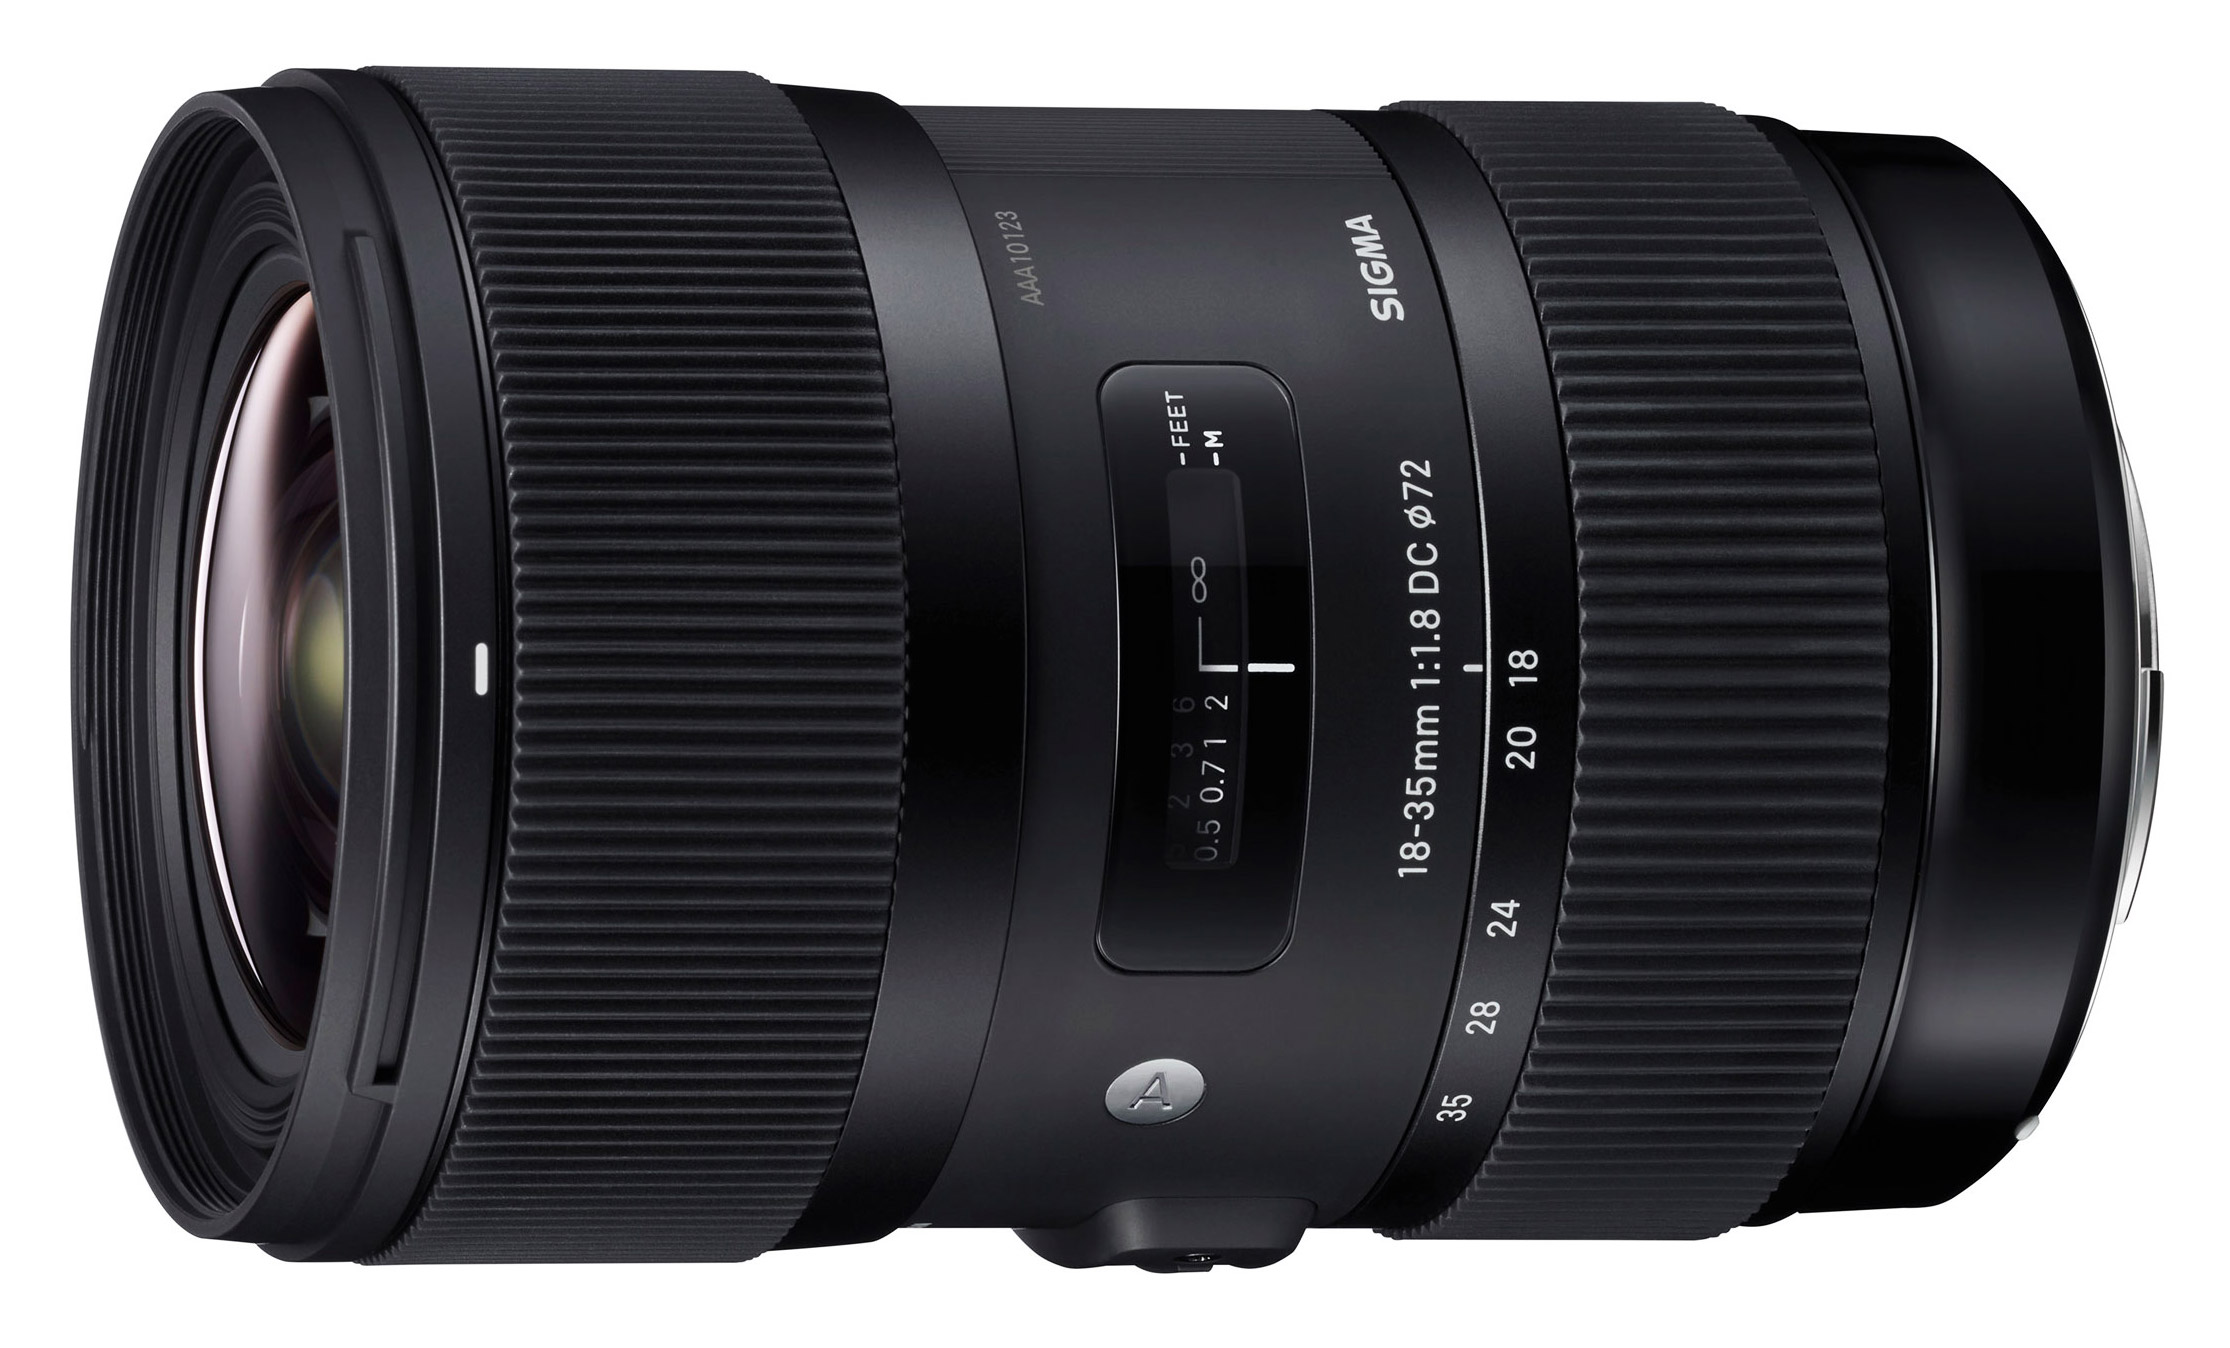 Sigma 18-35mm f/1.8 DC HSM Art : Specifications and Opinions | JuzaPhoto